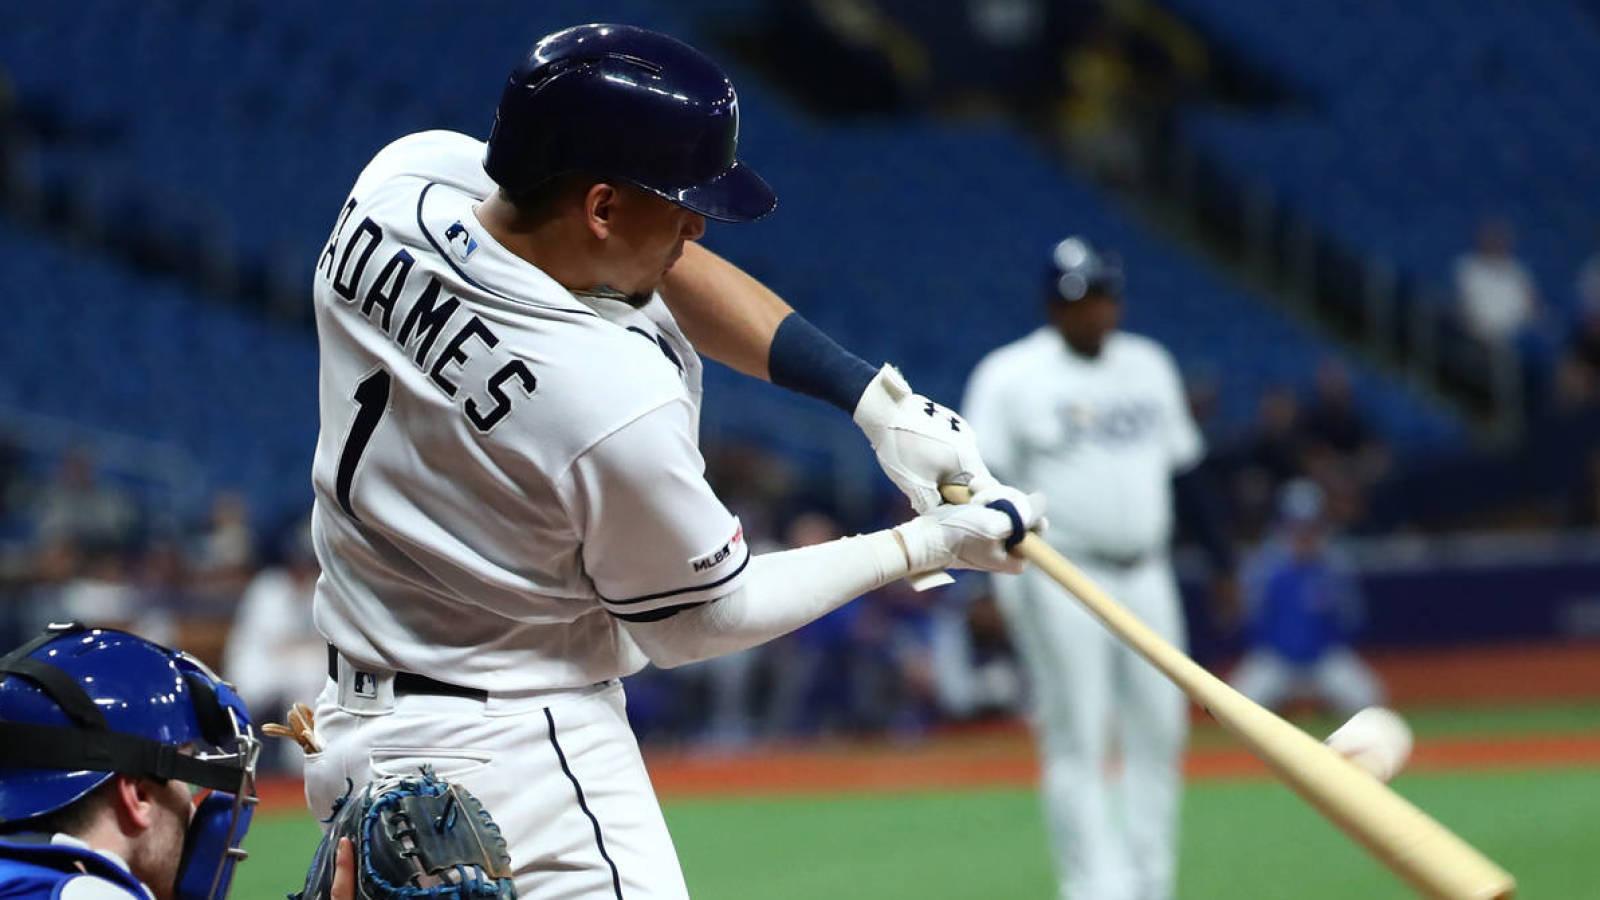 Willy Adames Had The Biggest Bat Flip After Walk Off Hit